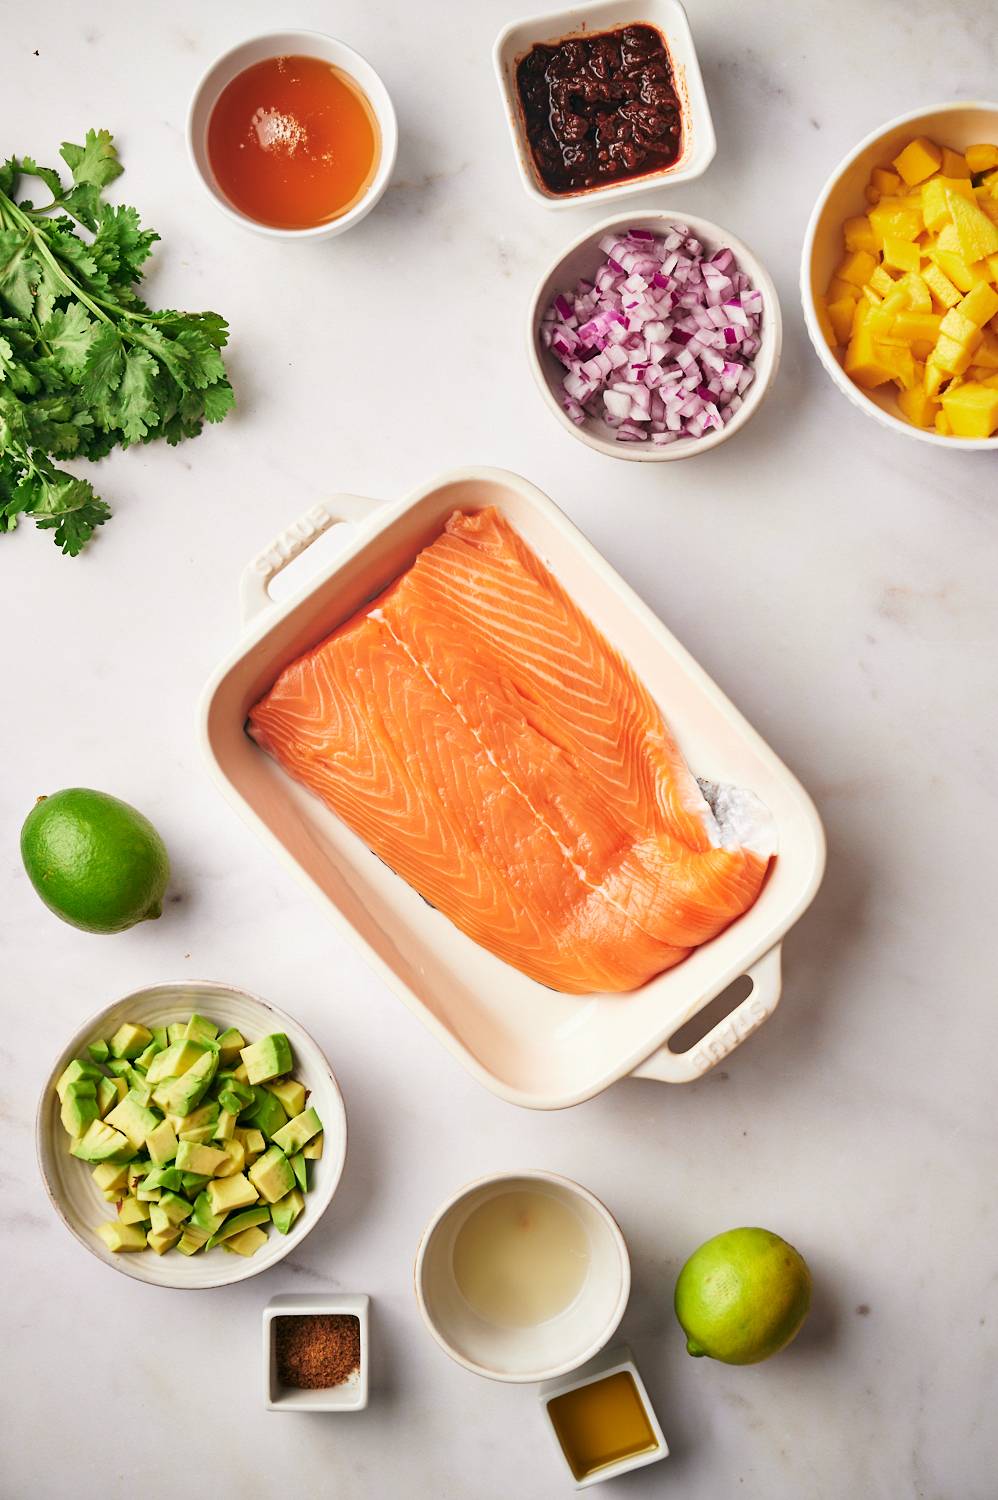 Ingredients for Honey Chipotle Salmon including raw salmon, mango, avocado, cilantro, red onions, chipotles, honey, and lime juice.